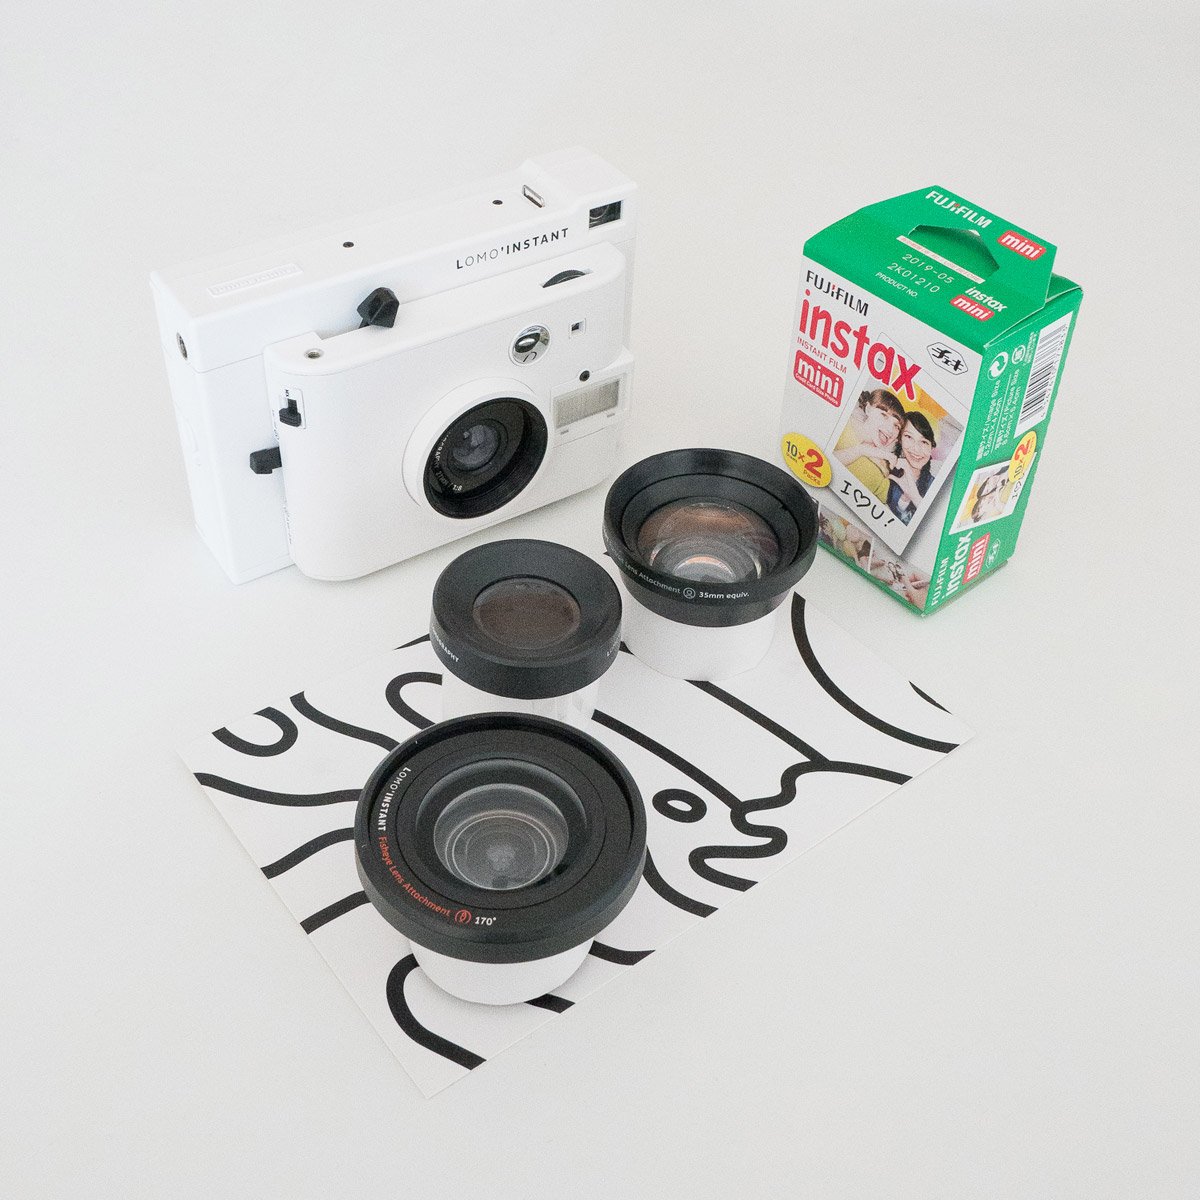 Lomo'Instant Camera and lenses